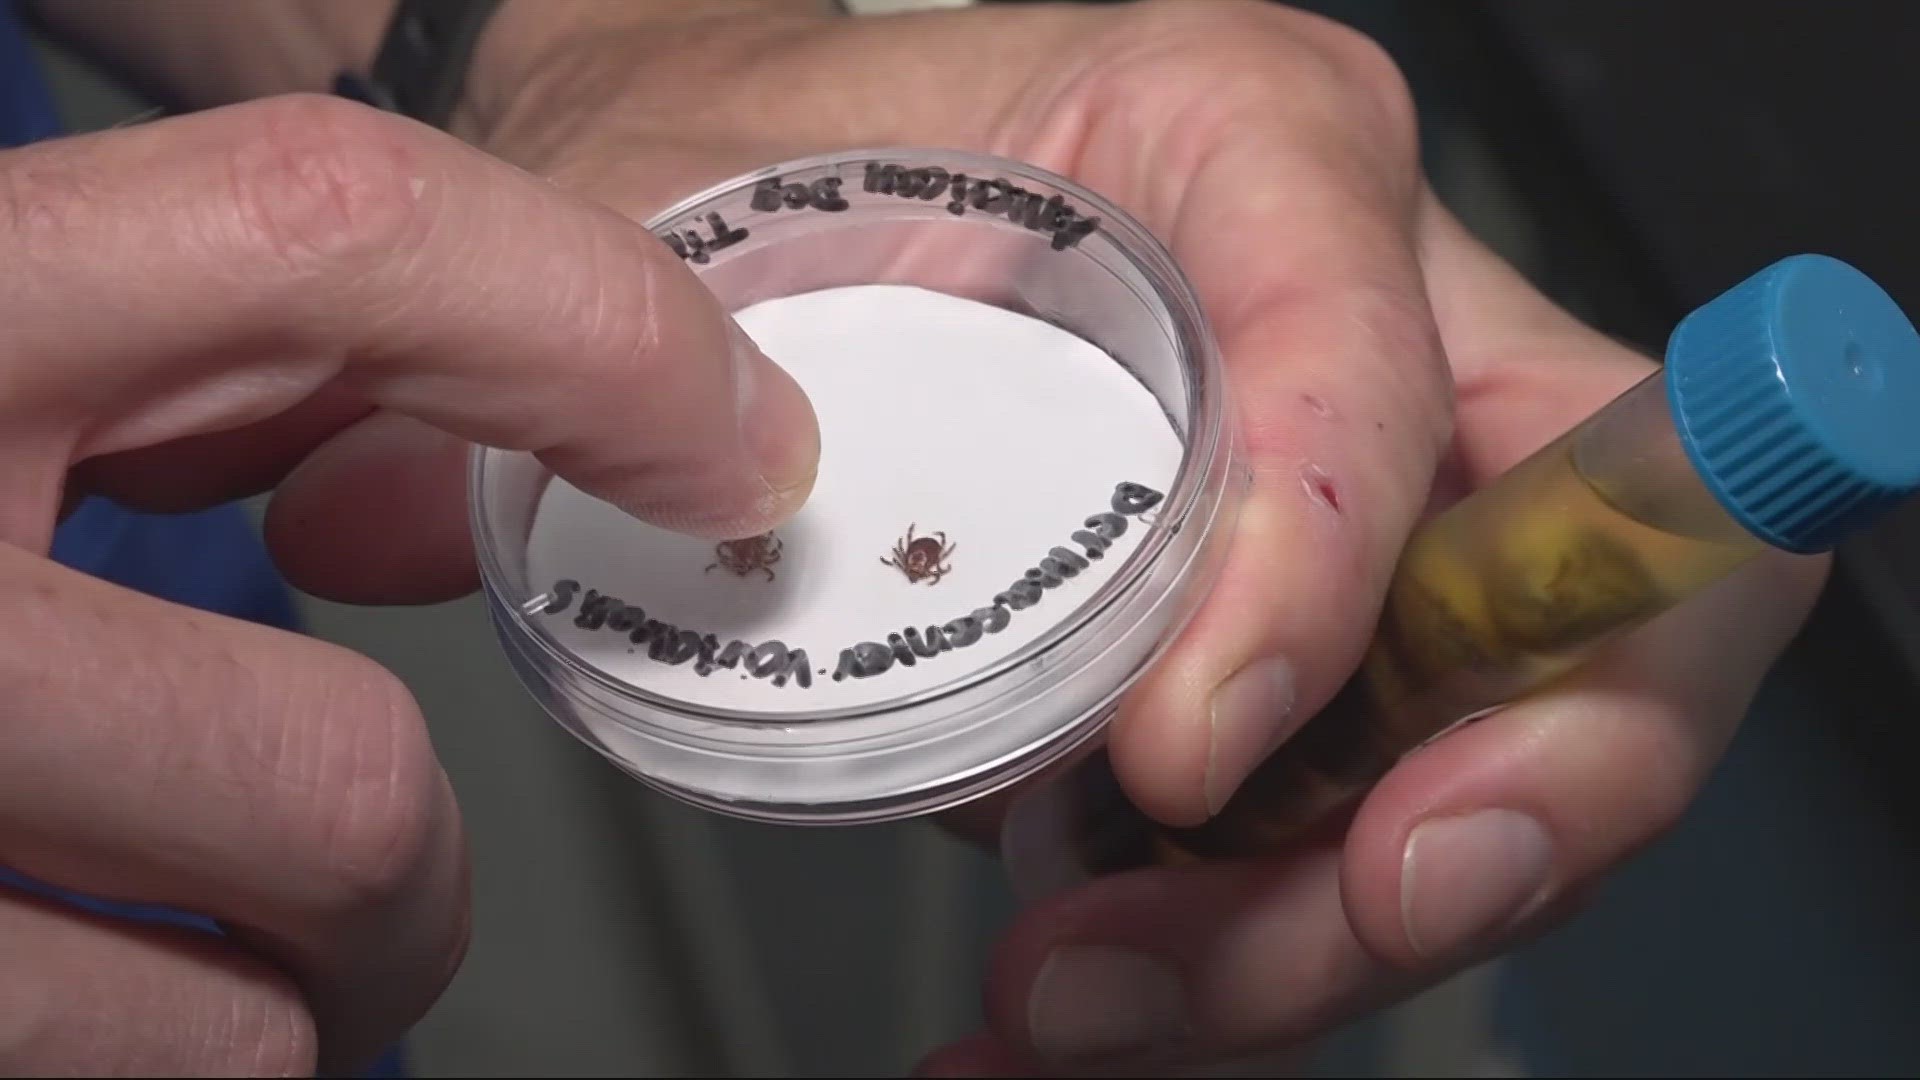 Researchers at the University of North Florida say official Lyme disease statistics underestimate the number of people with Lyme disease.